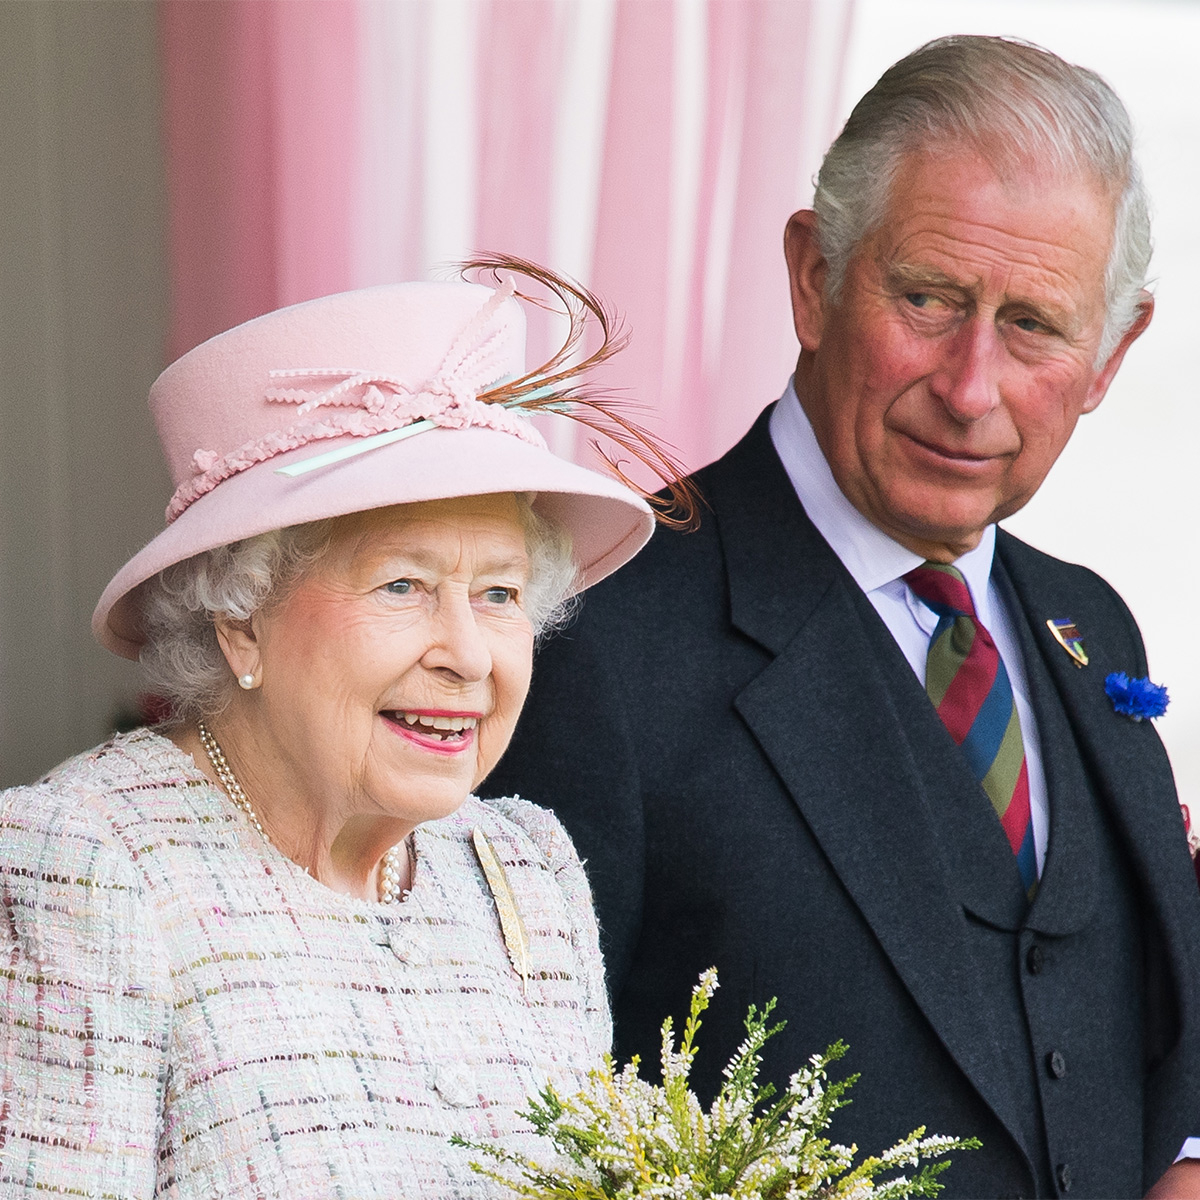 King Charles III becomes monarch after death of mother, Queen